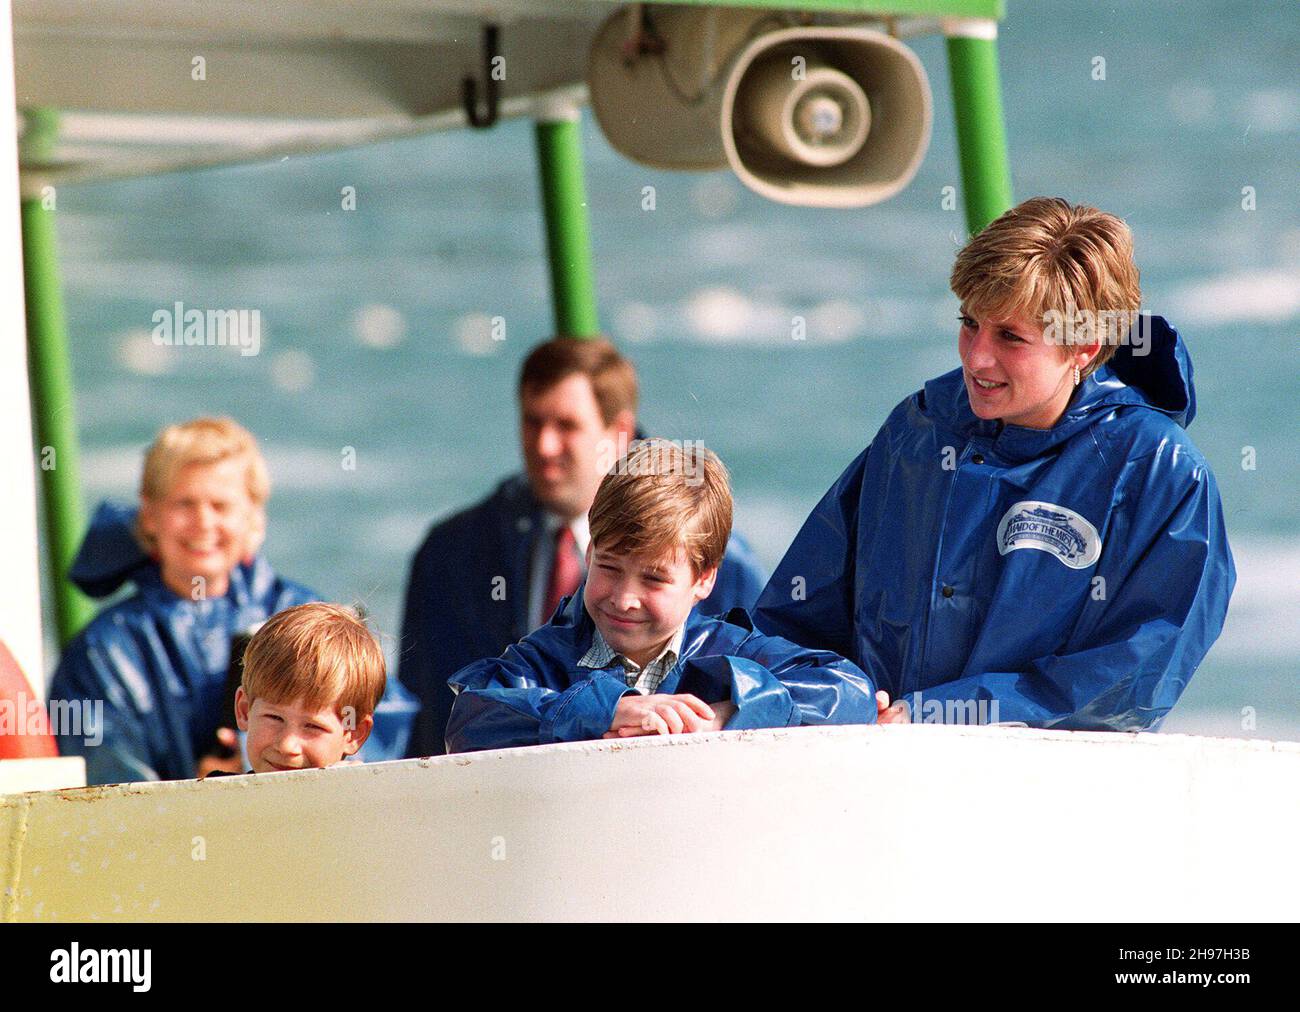 File photo dated 26/10/91 of Diana, Princess of Wales with her children, then Prince William, 9, and then Prince Harry, 7, on board the Maid of Mist for a close-up look at Niagara Falls. The Duke of Cambridge has revealed a Tina Turner hit brings back treasured memories of his mother singing it at the 'top of her voice' with her sons as she drove them to school. William shared the poignant 'family moment' in an audio walking tour recorded for Apple, and described how Diana, Princess of Wales took him to a homeless shelter to teach him the important lesson - there is life outside 'palace walls' Stock Photo